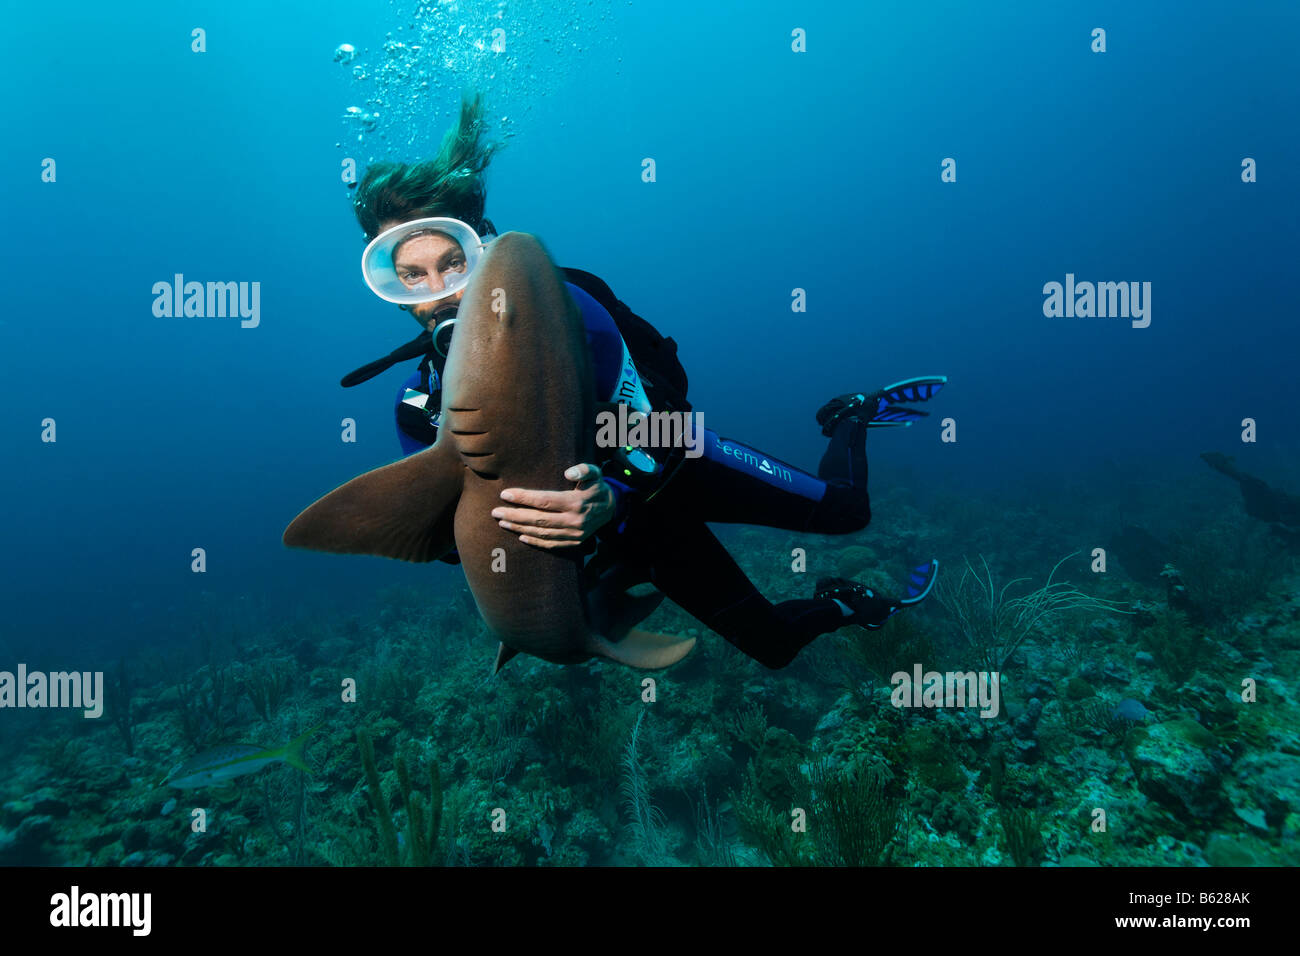 Female scuba diver holding a Caribbean Nurse Shark (Ginglymostoma cirratum), special contact on the sharks belly causes it to f Stock Photo